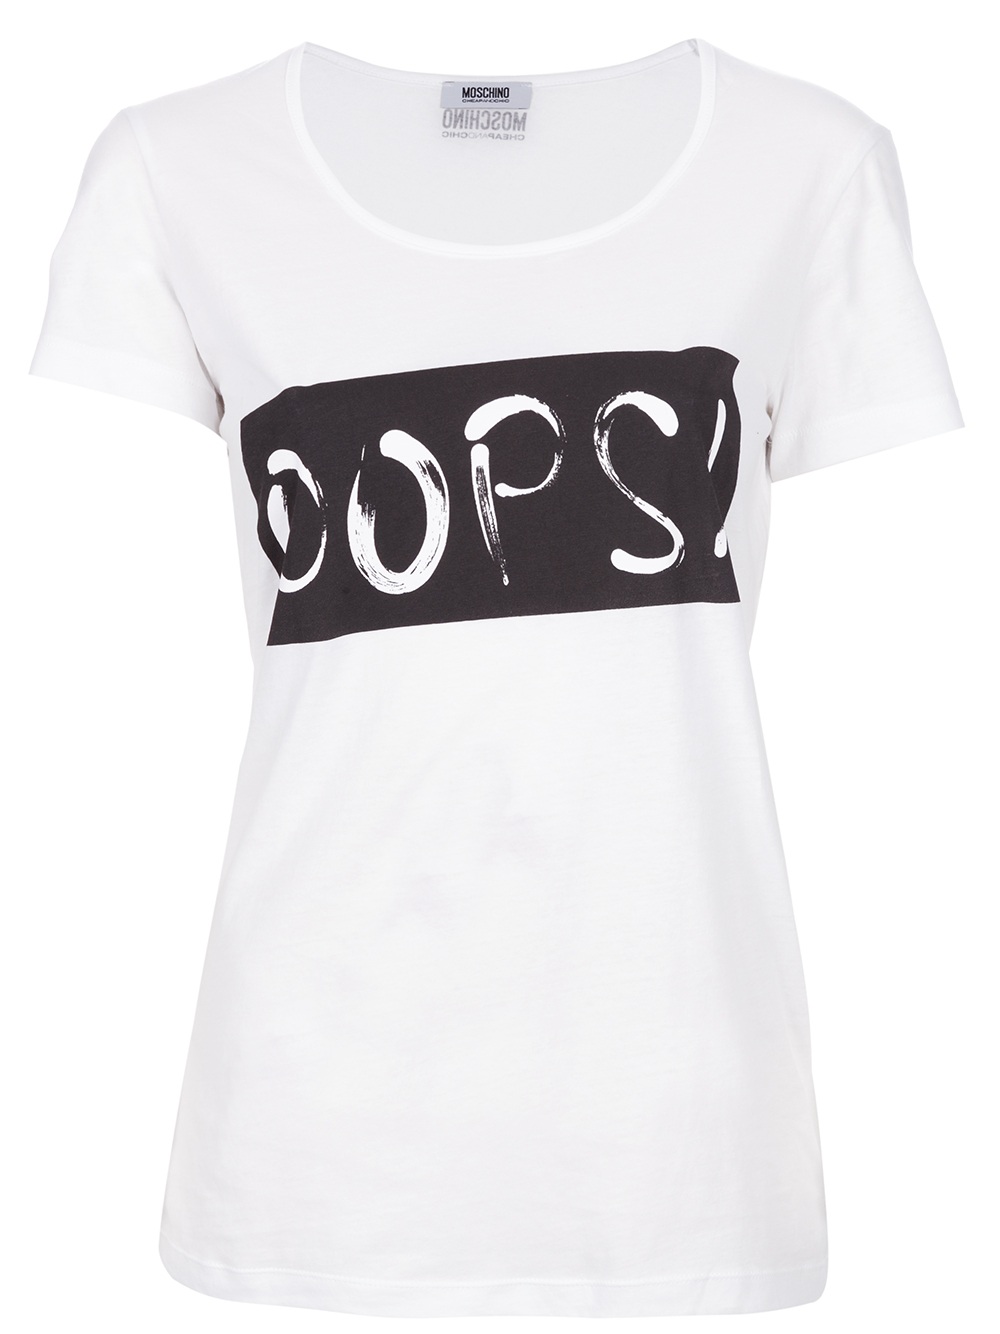 Moschino Cheap & Chic Oops T-shirt in White | Lyst